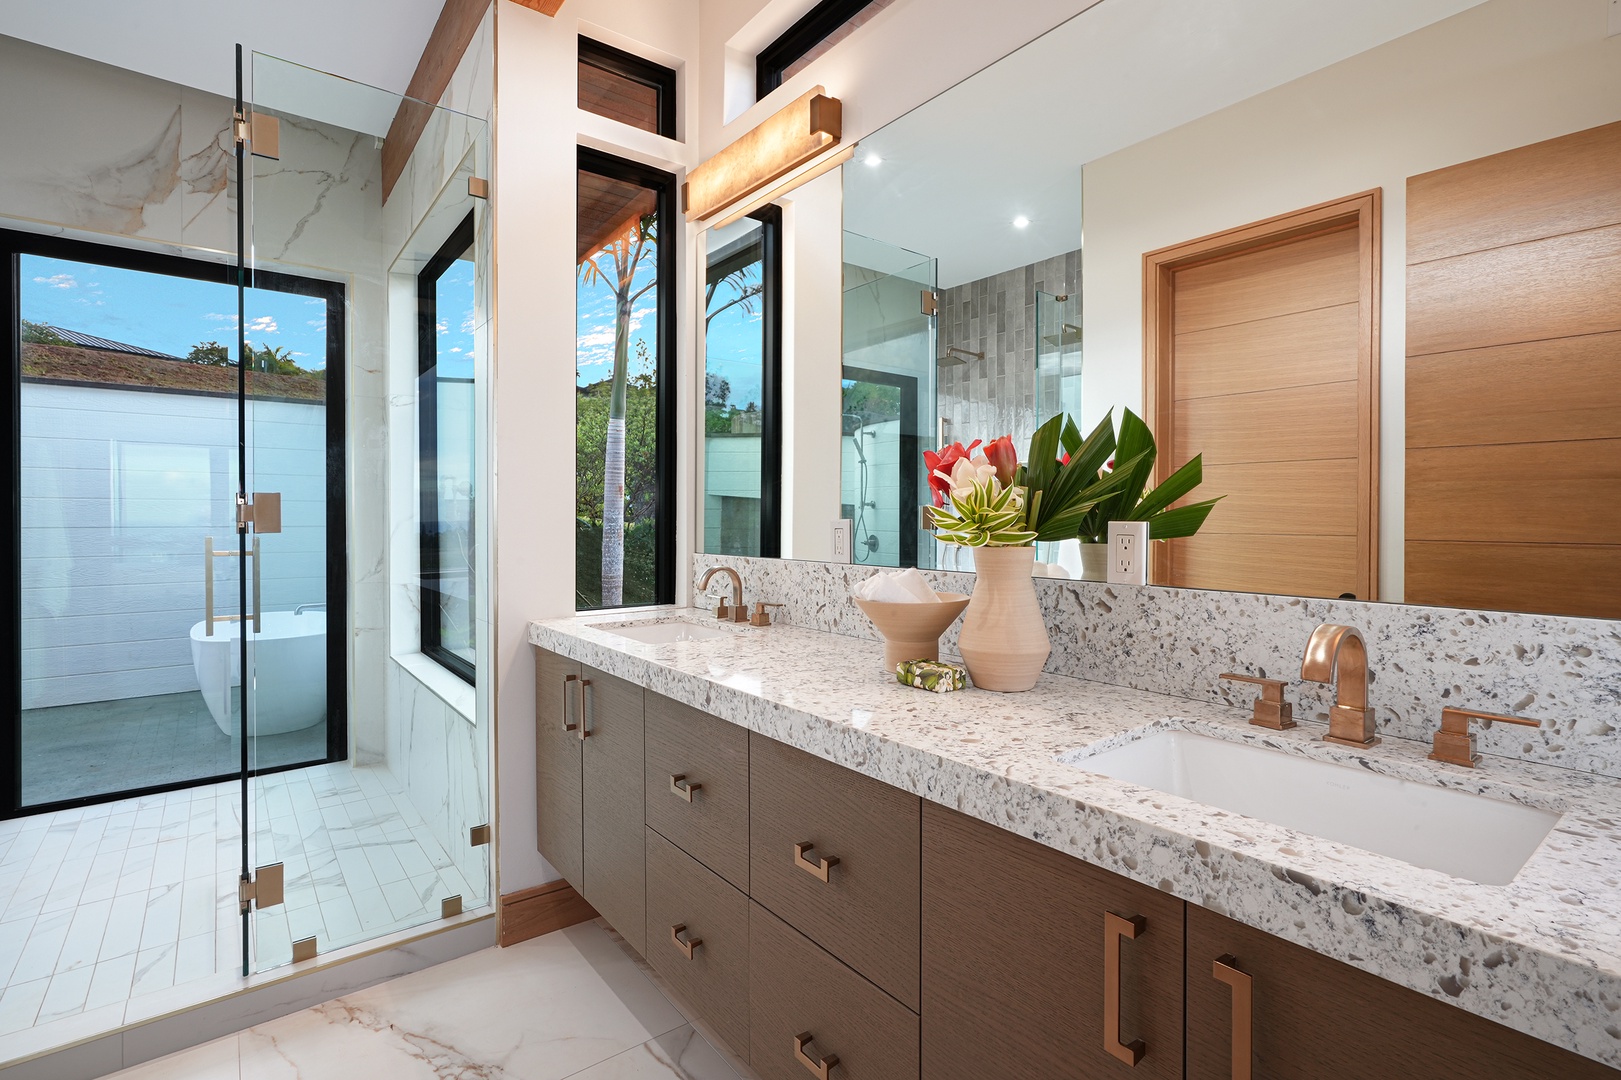 Koloa Vacation Rentals, Hale Keaka at Kukui'ula - Refresh in this bright ensuite, where sleek design meets natural light, creating an airy sanctuary for both beginning and unwinding the day.